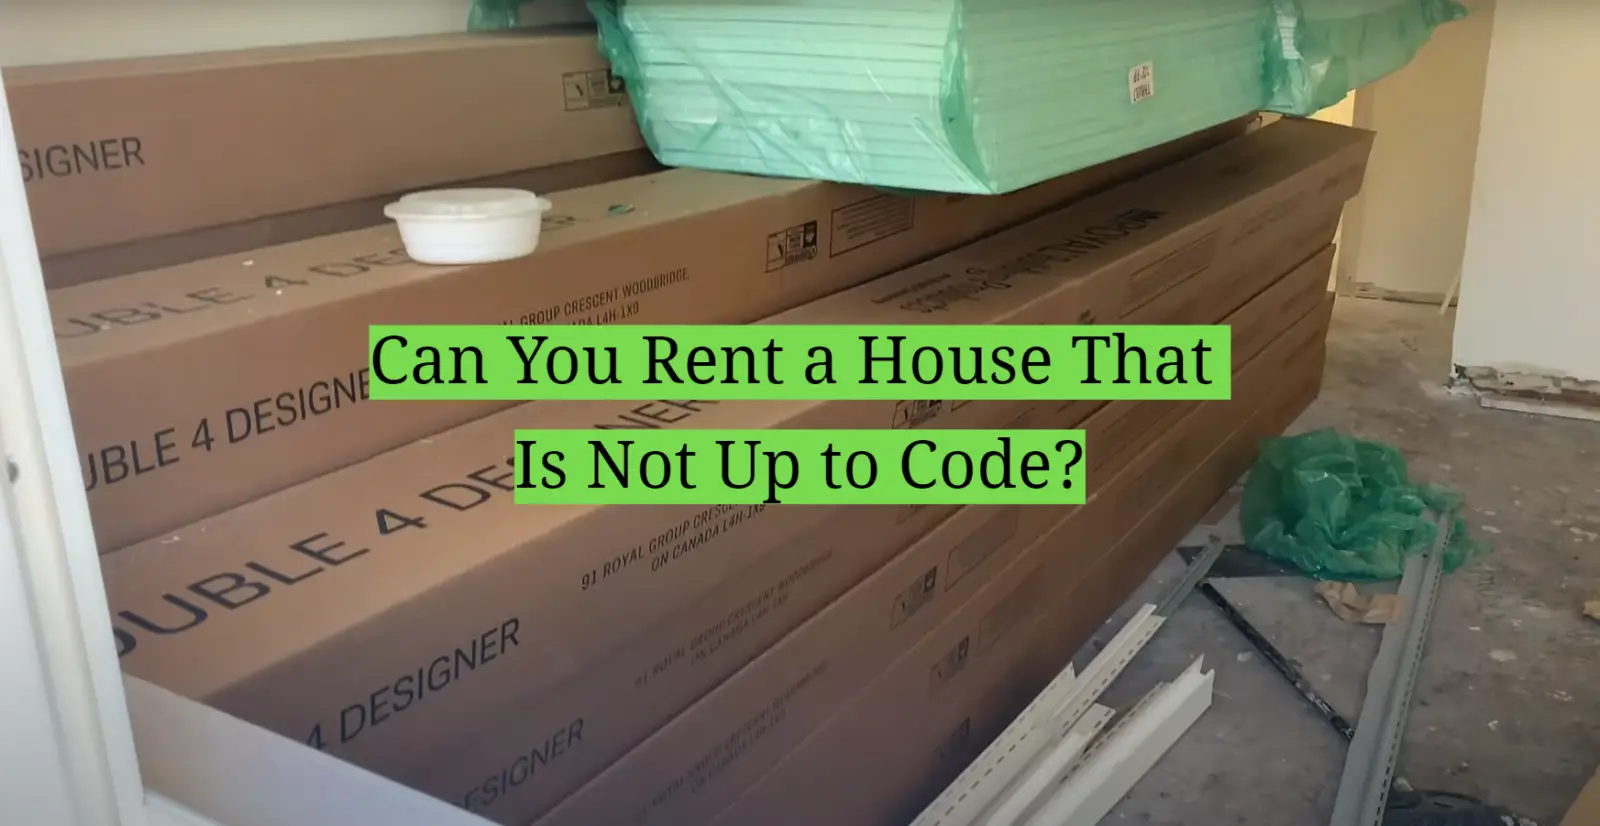 Can You Rent a House That Is Not Up to Code?